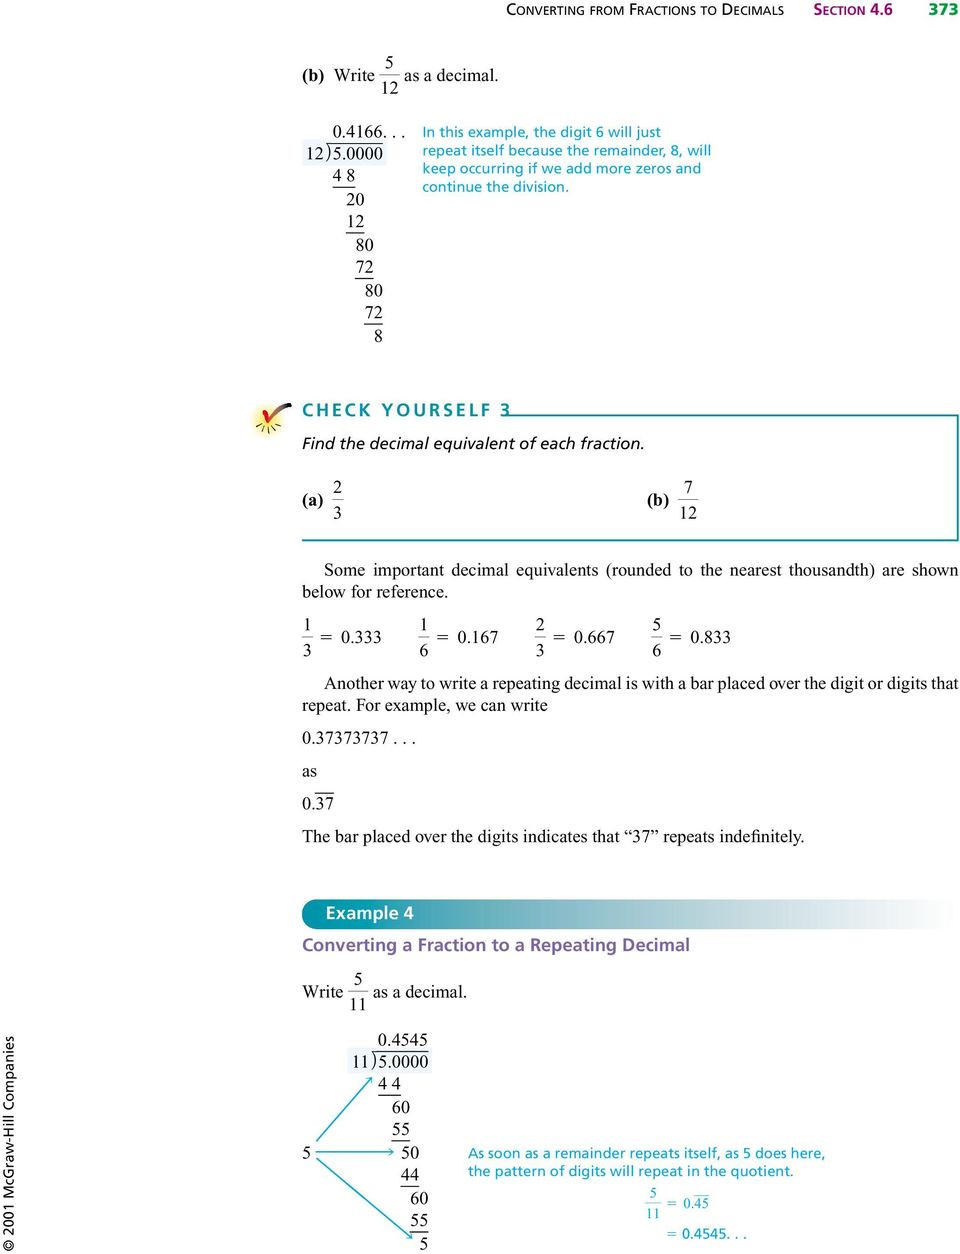 Repeating Decimals to Fractions Worksheet Converting From Fractions to Decimals Pdf Free Download